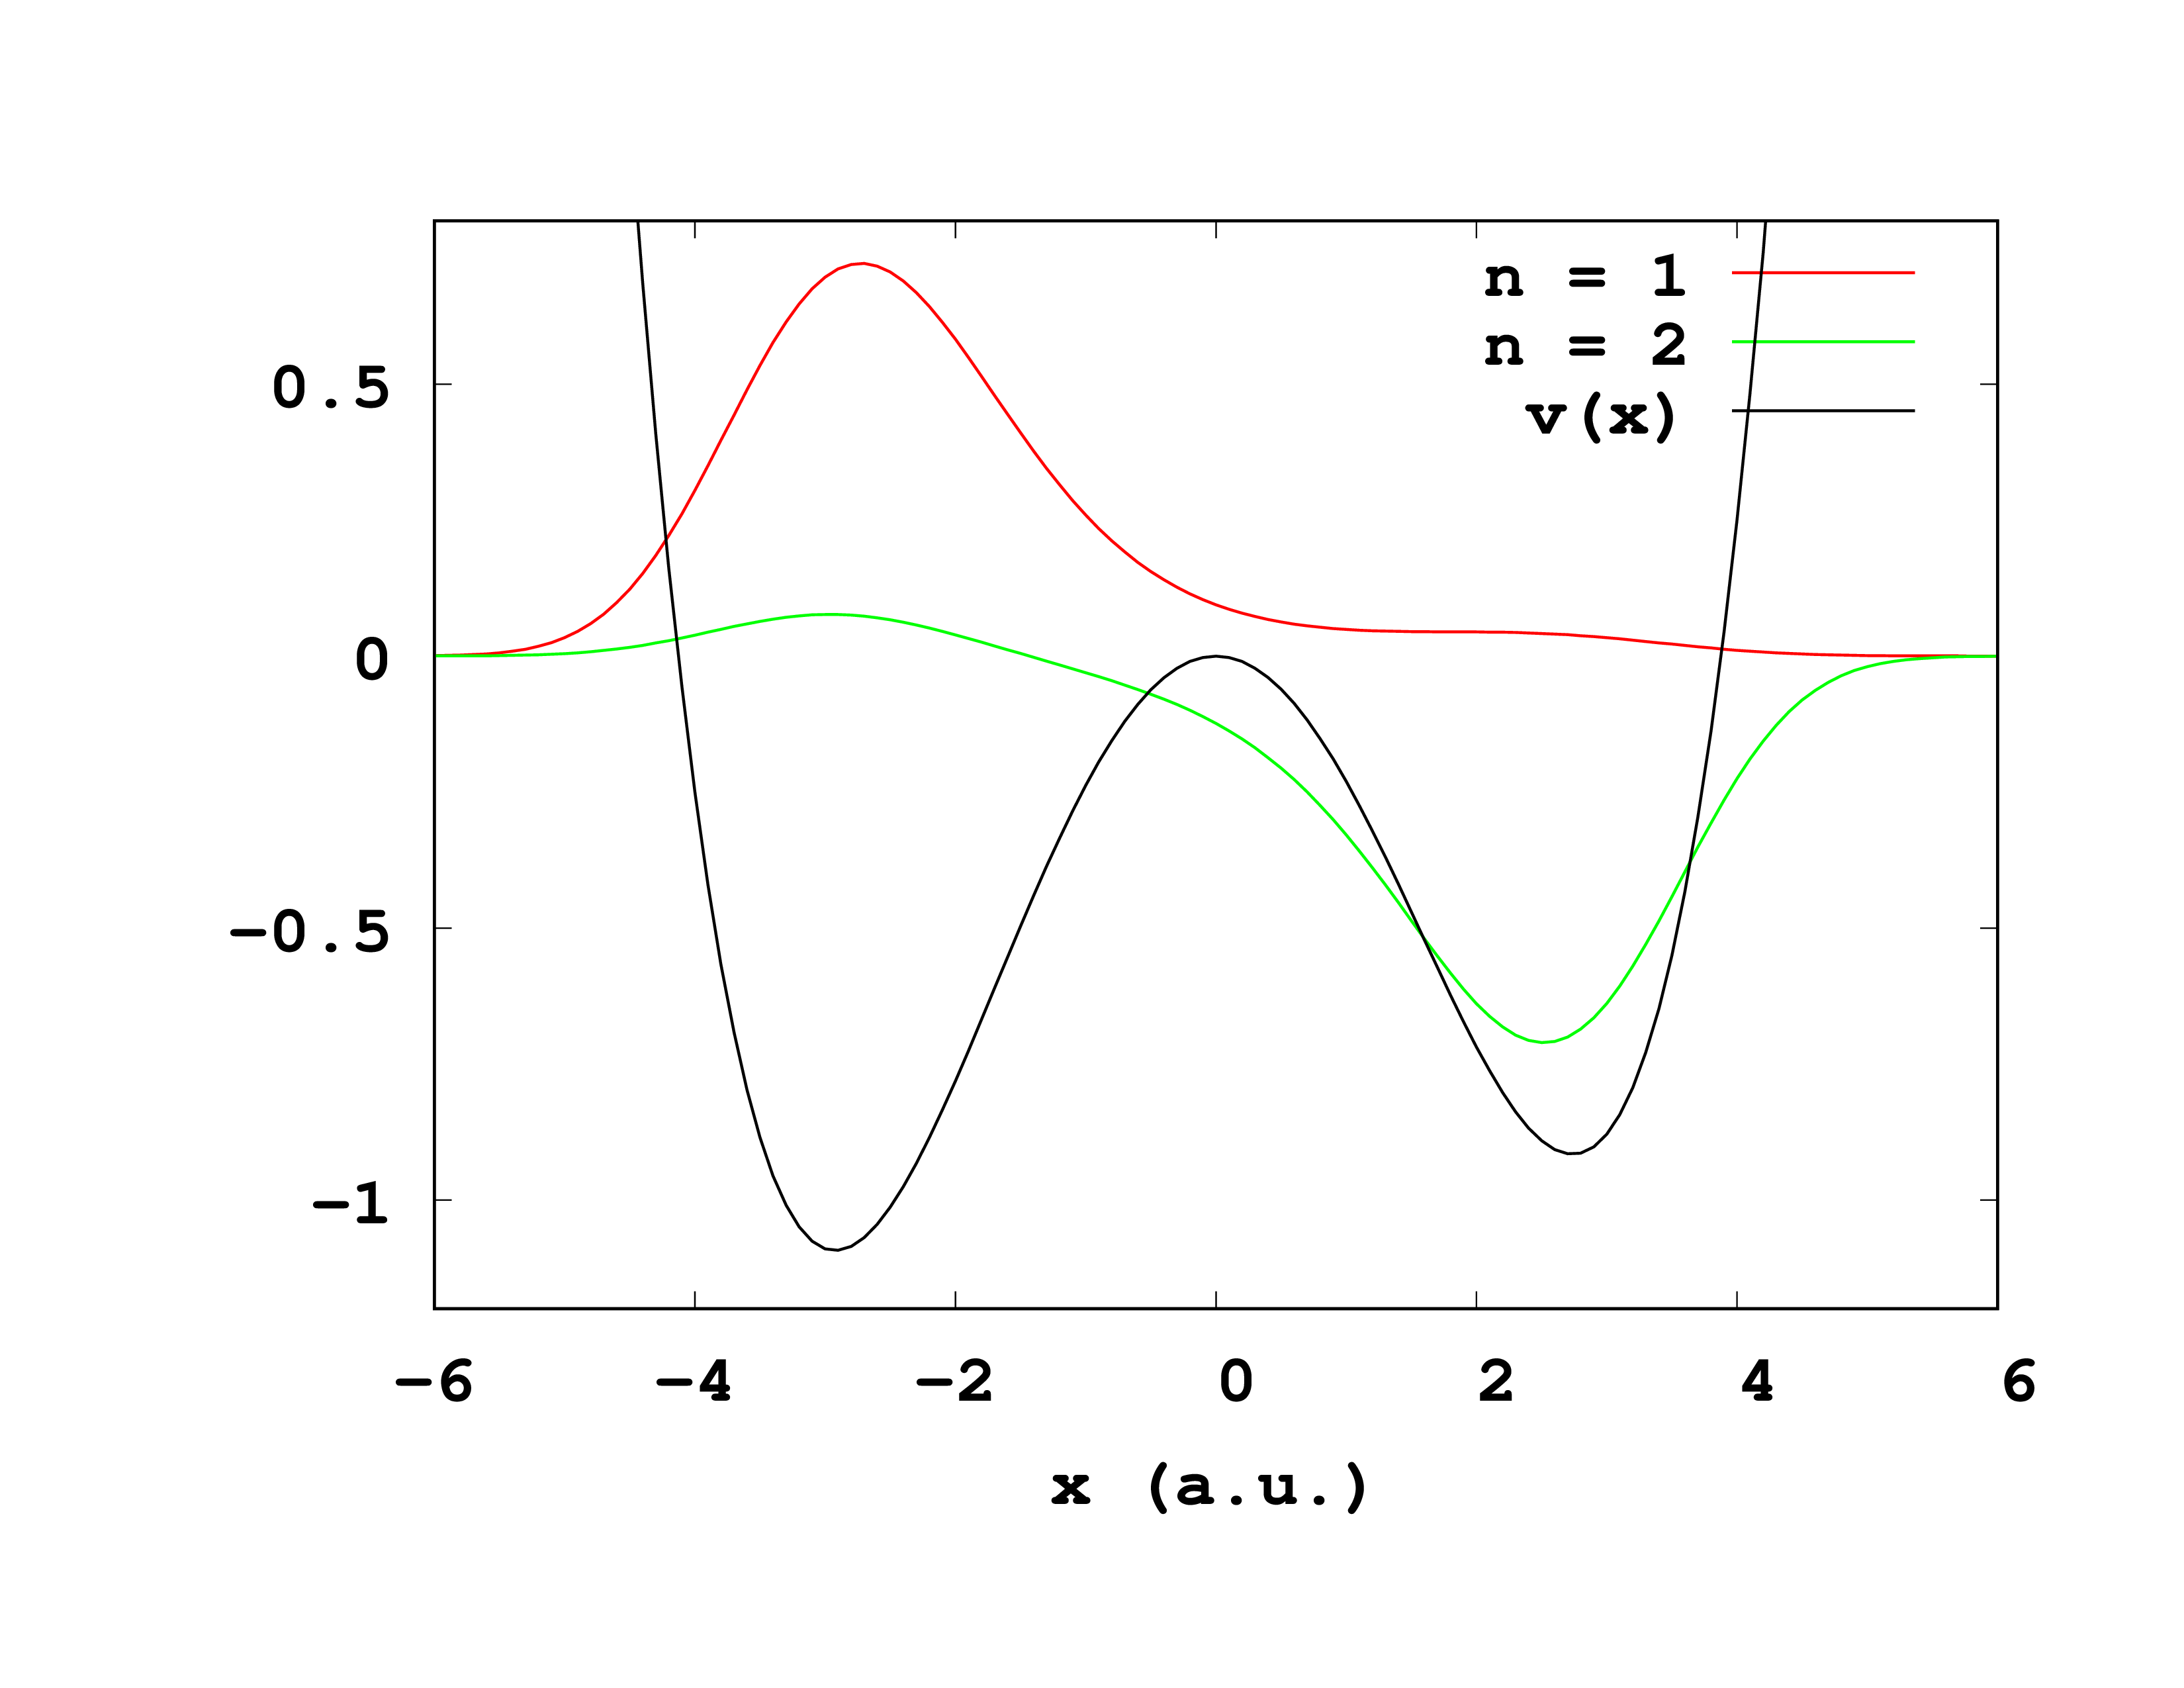 Fig. 1. Black curve: external potential defining the asymmetric double well used in this example. Red and green: ground state and excited state, respectively, corresponding to this system